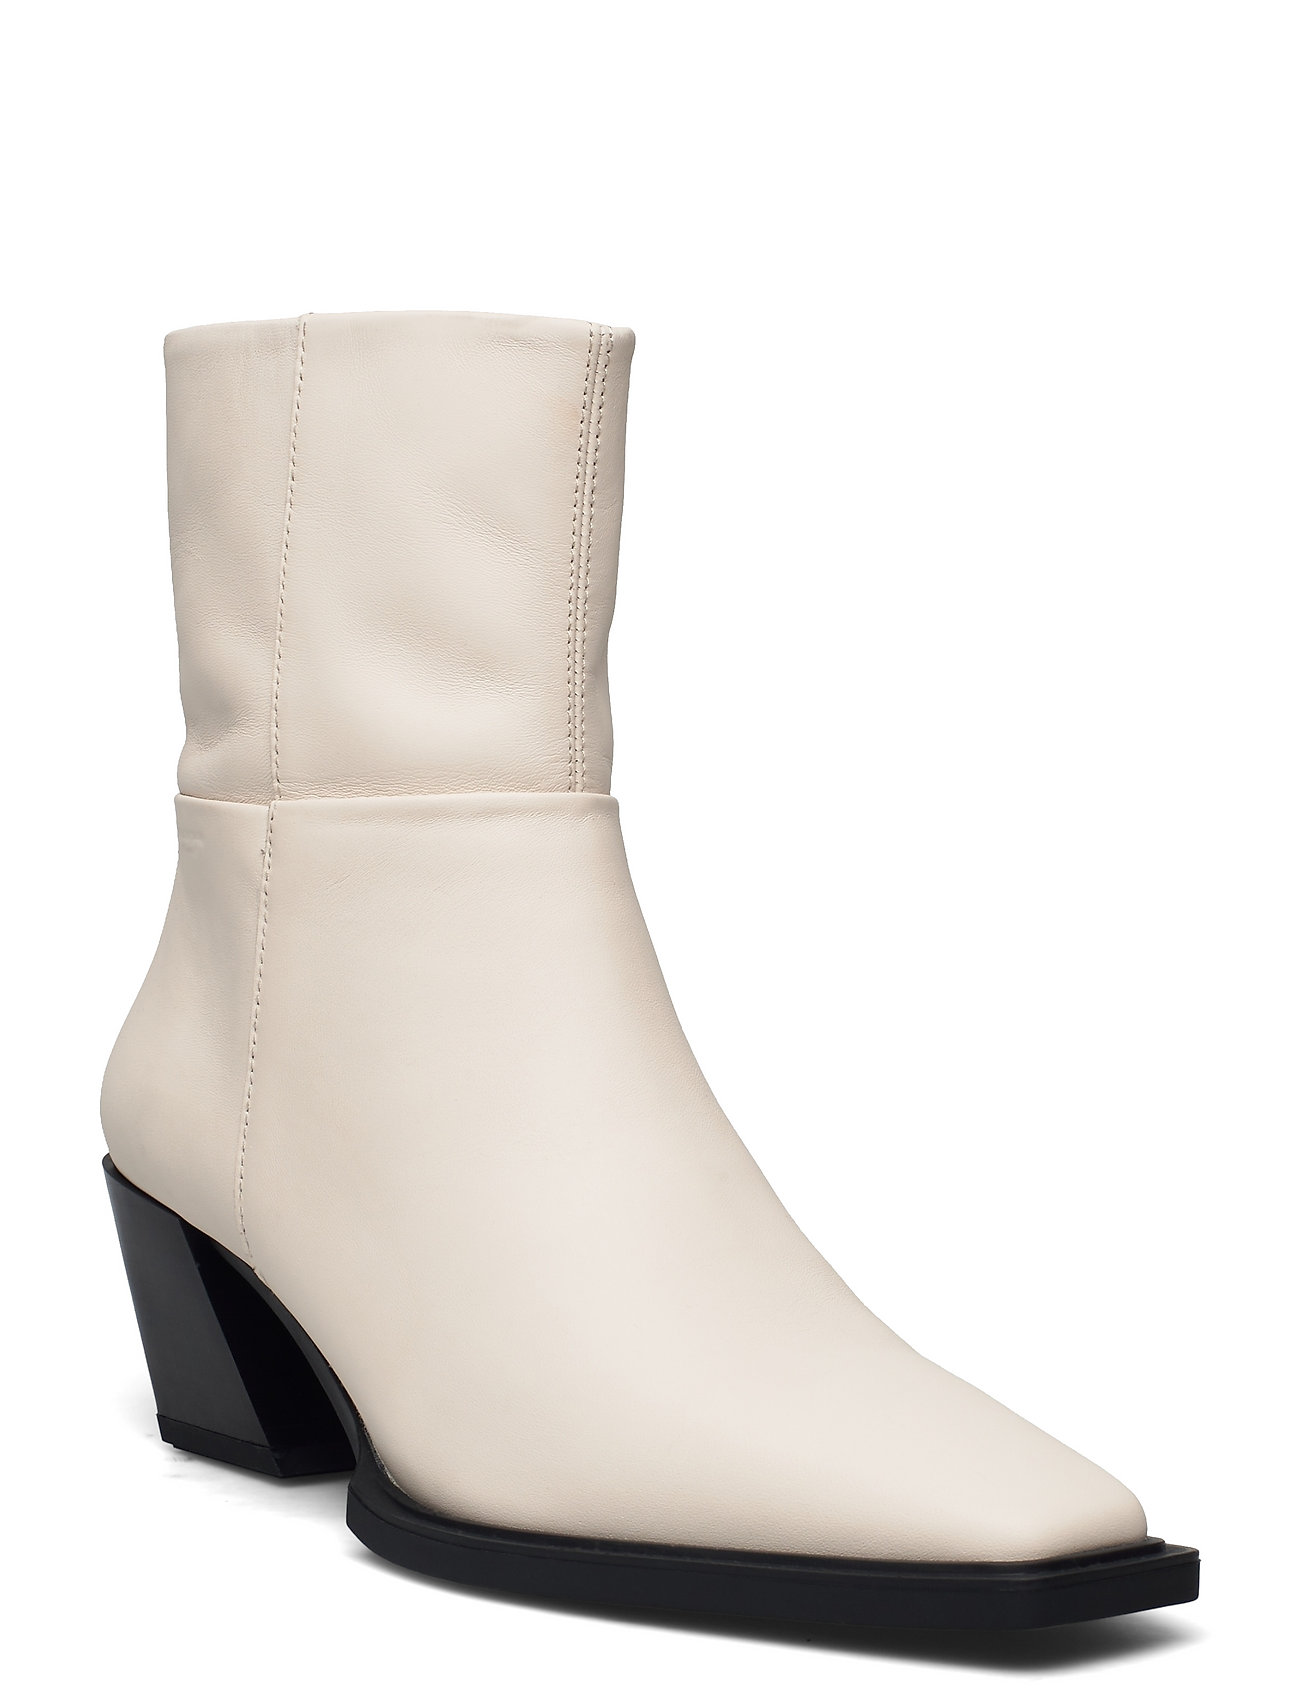 Alina Shoes Boots Ankle Boots Ankle Boot - Heel Kermanvärinen VAGABOND